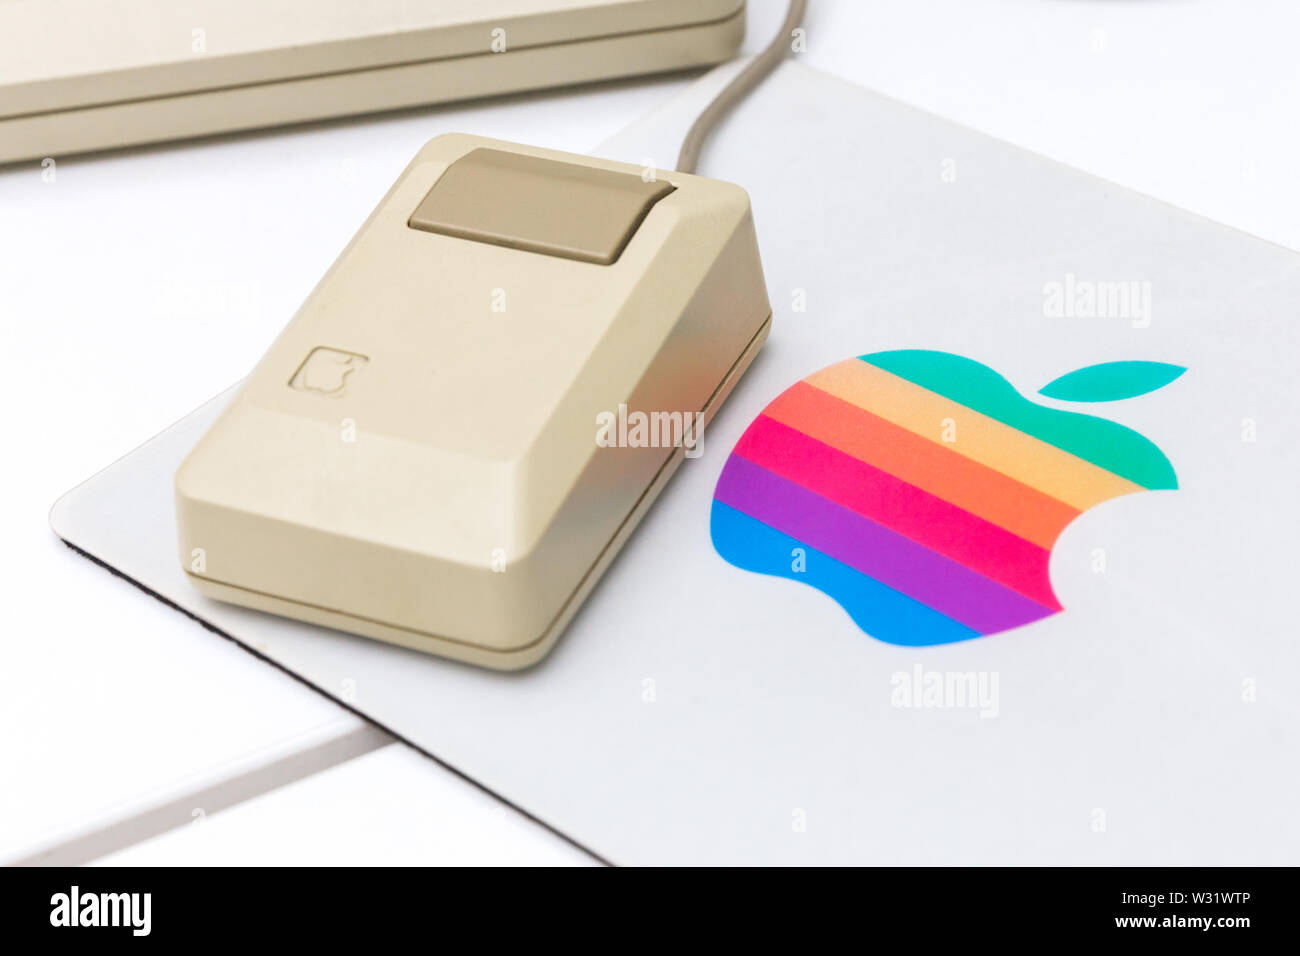 MOSCOW, RUSSIA - JUNE 11, 2018: Old original Apple Mac mouse in museum in Moscow Russia Stock Photo